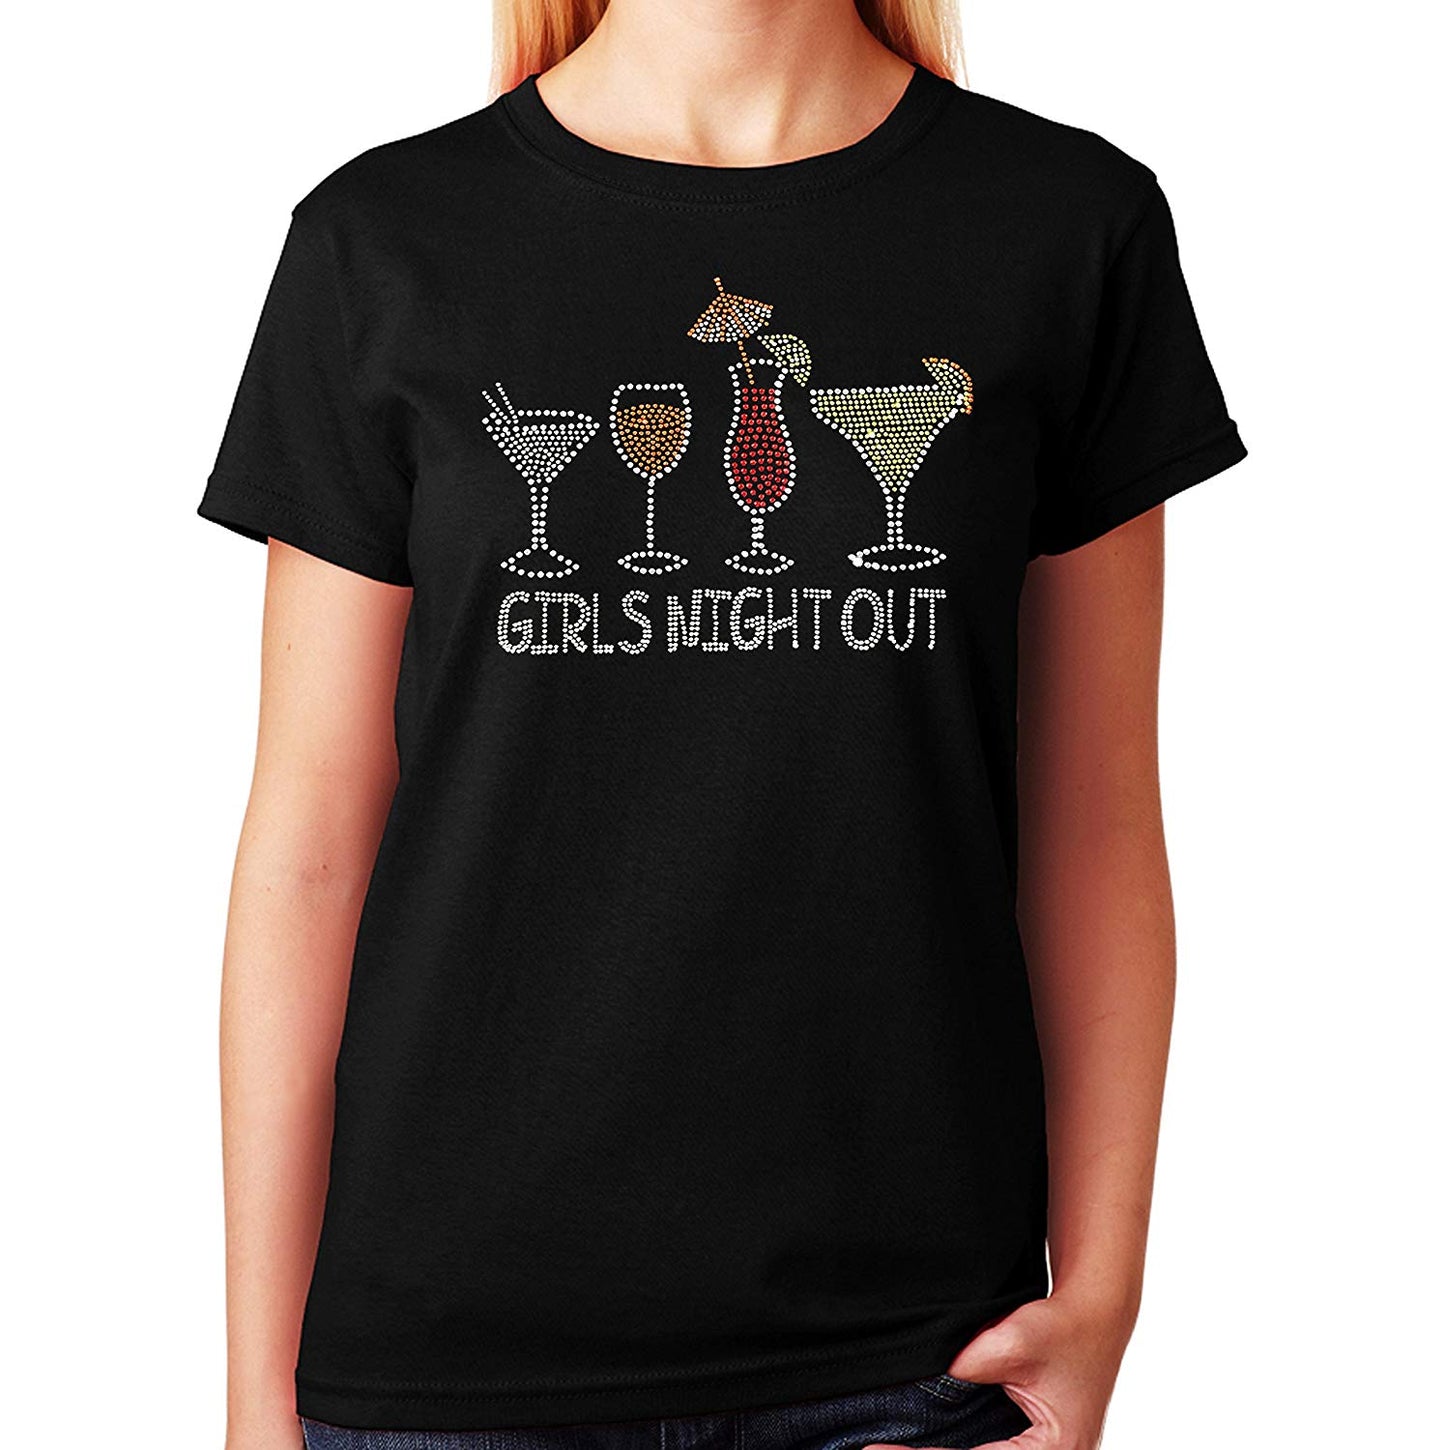 Women's / Unisex T-Shirt with Girls Night Out With Drinks in Rhinestones